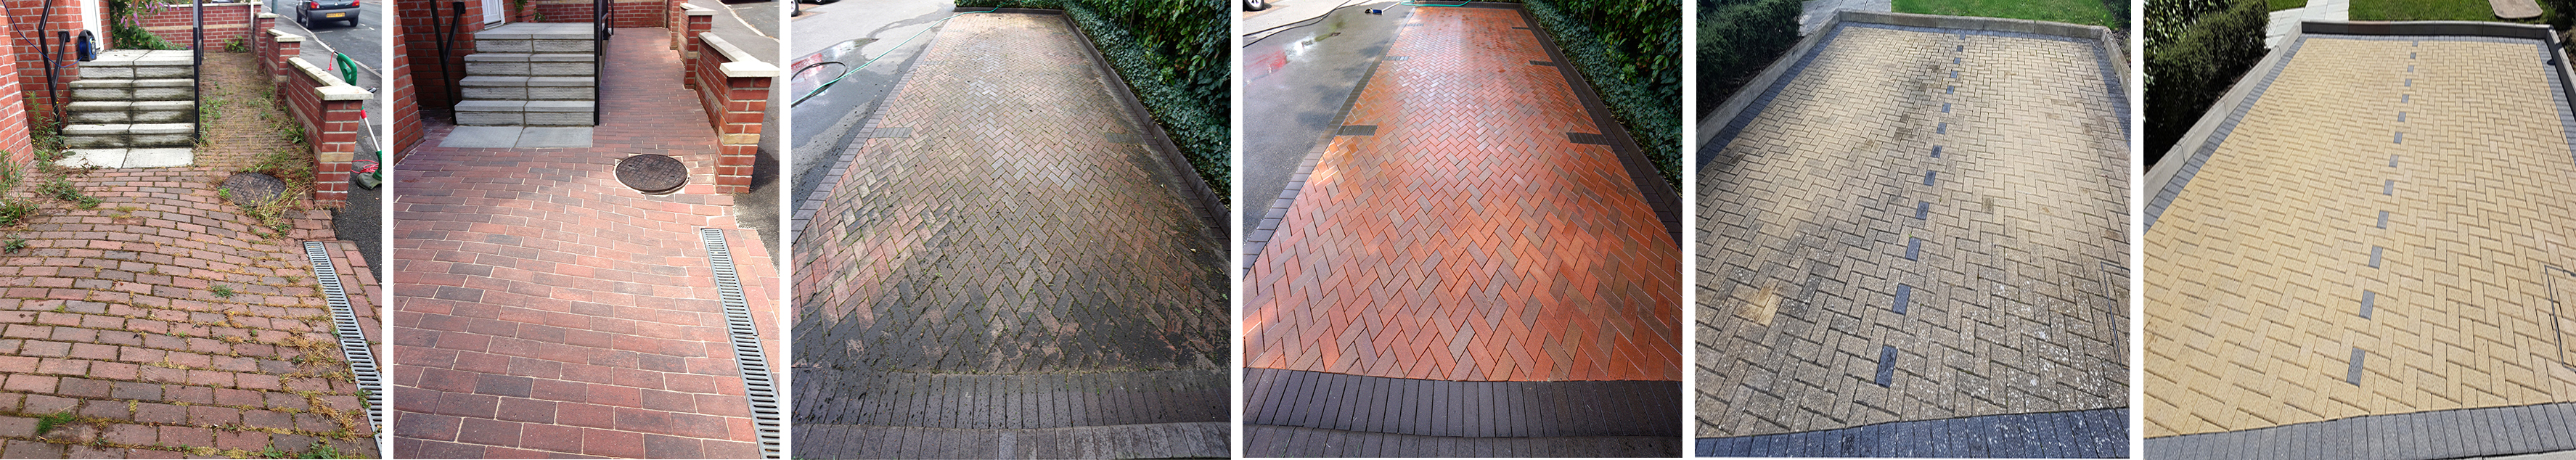 Driveway Cleaning Services in Rockford, Hampshire